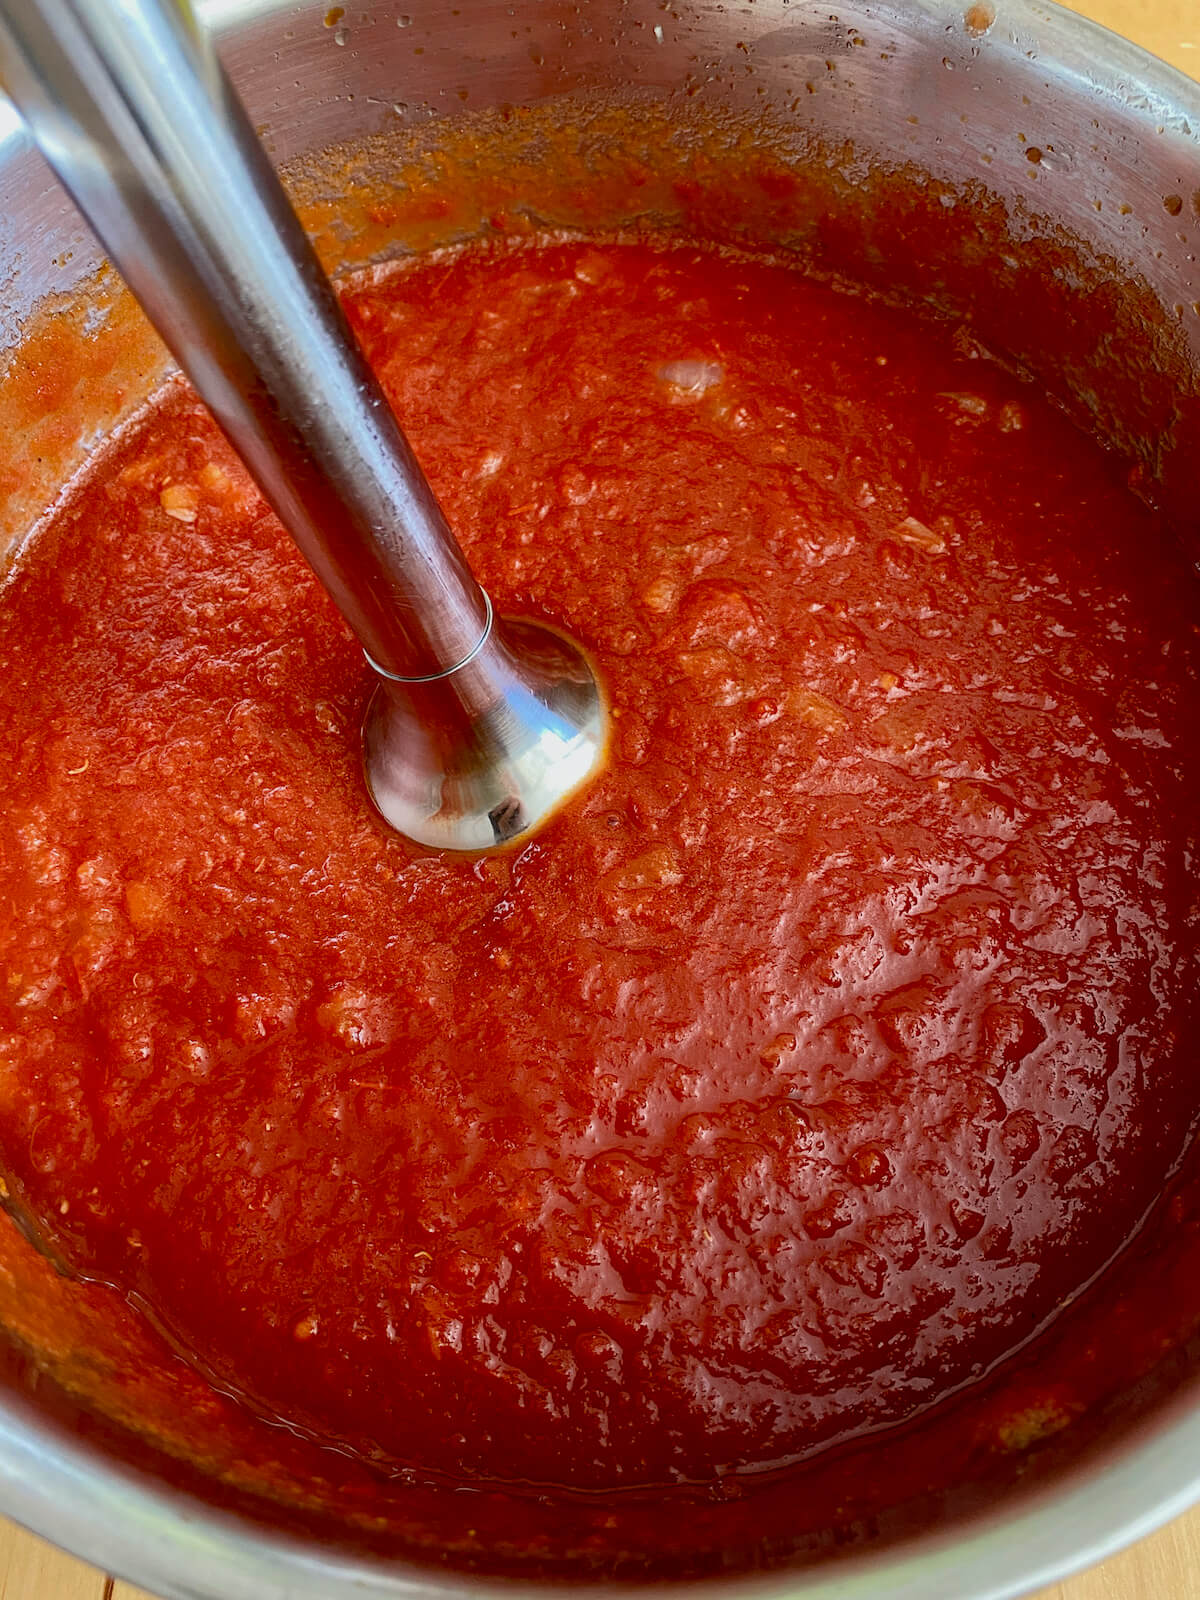 An immersion blender blending the crushed tomatoes and aromatics together.